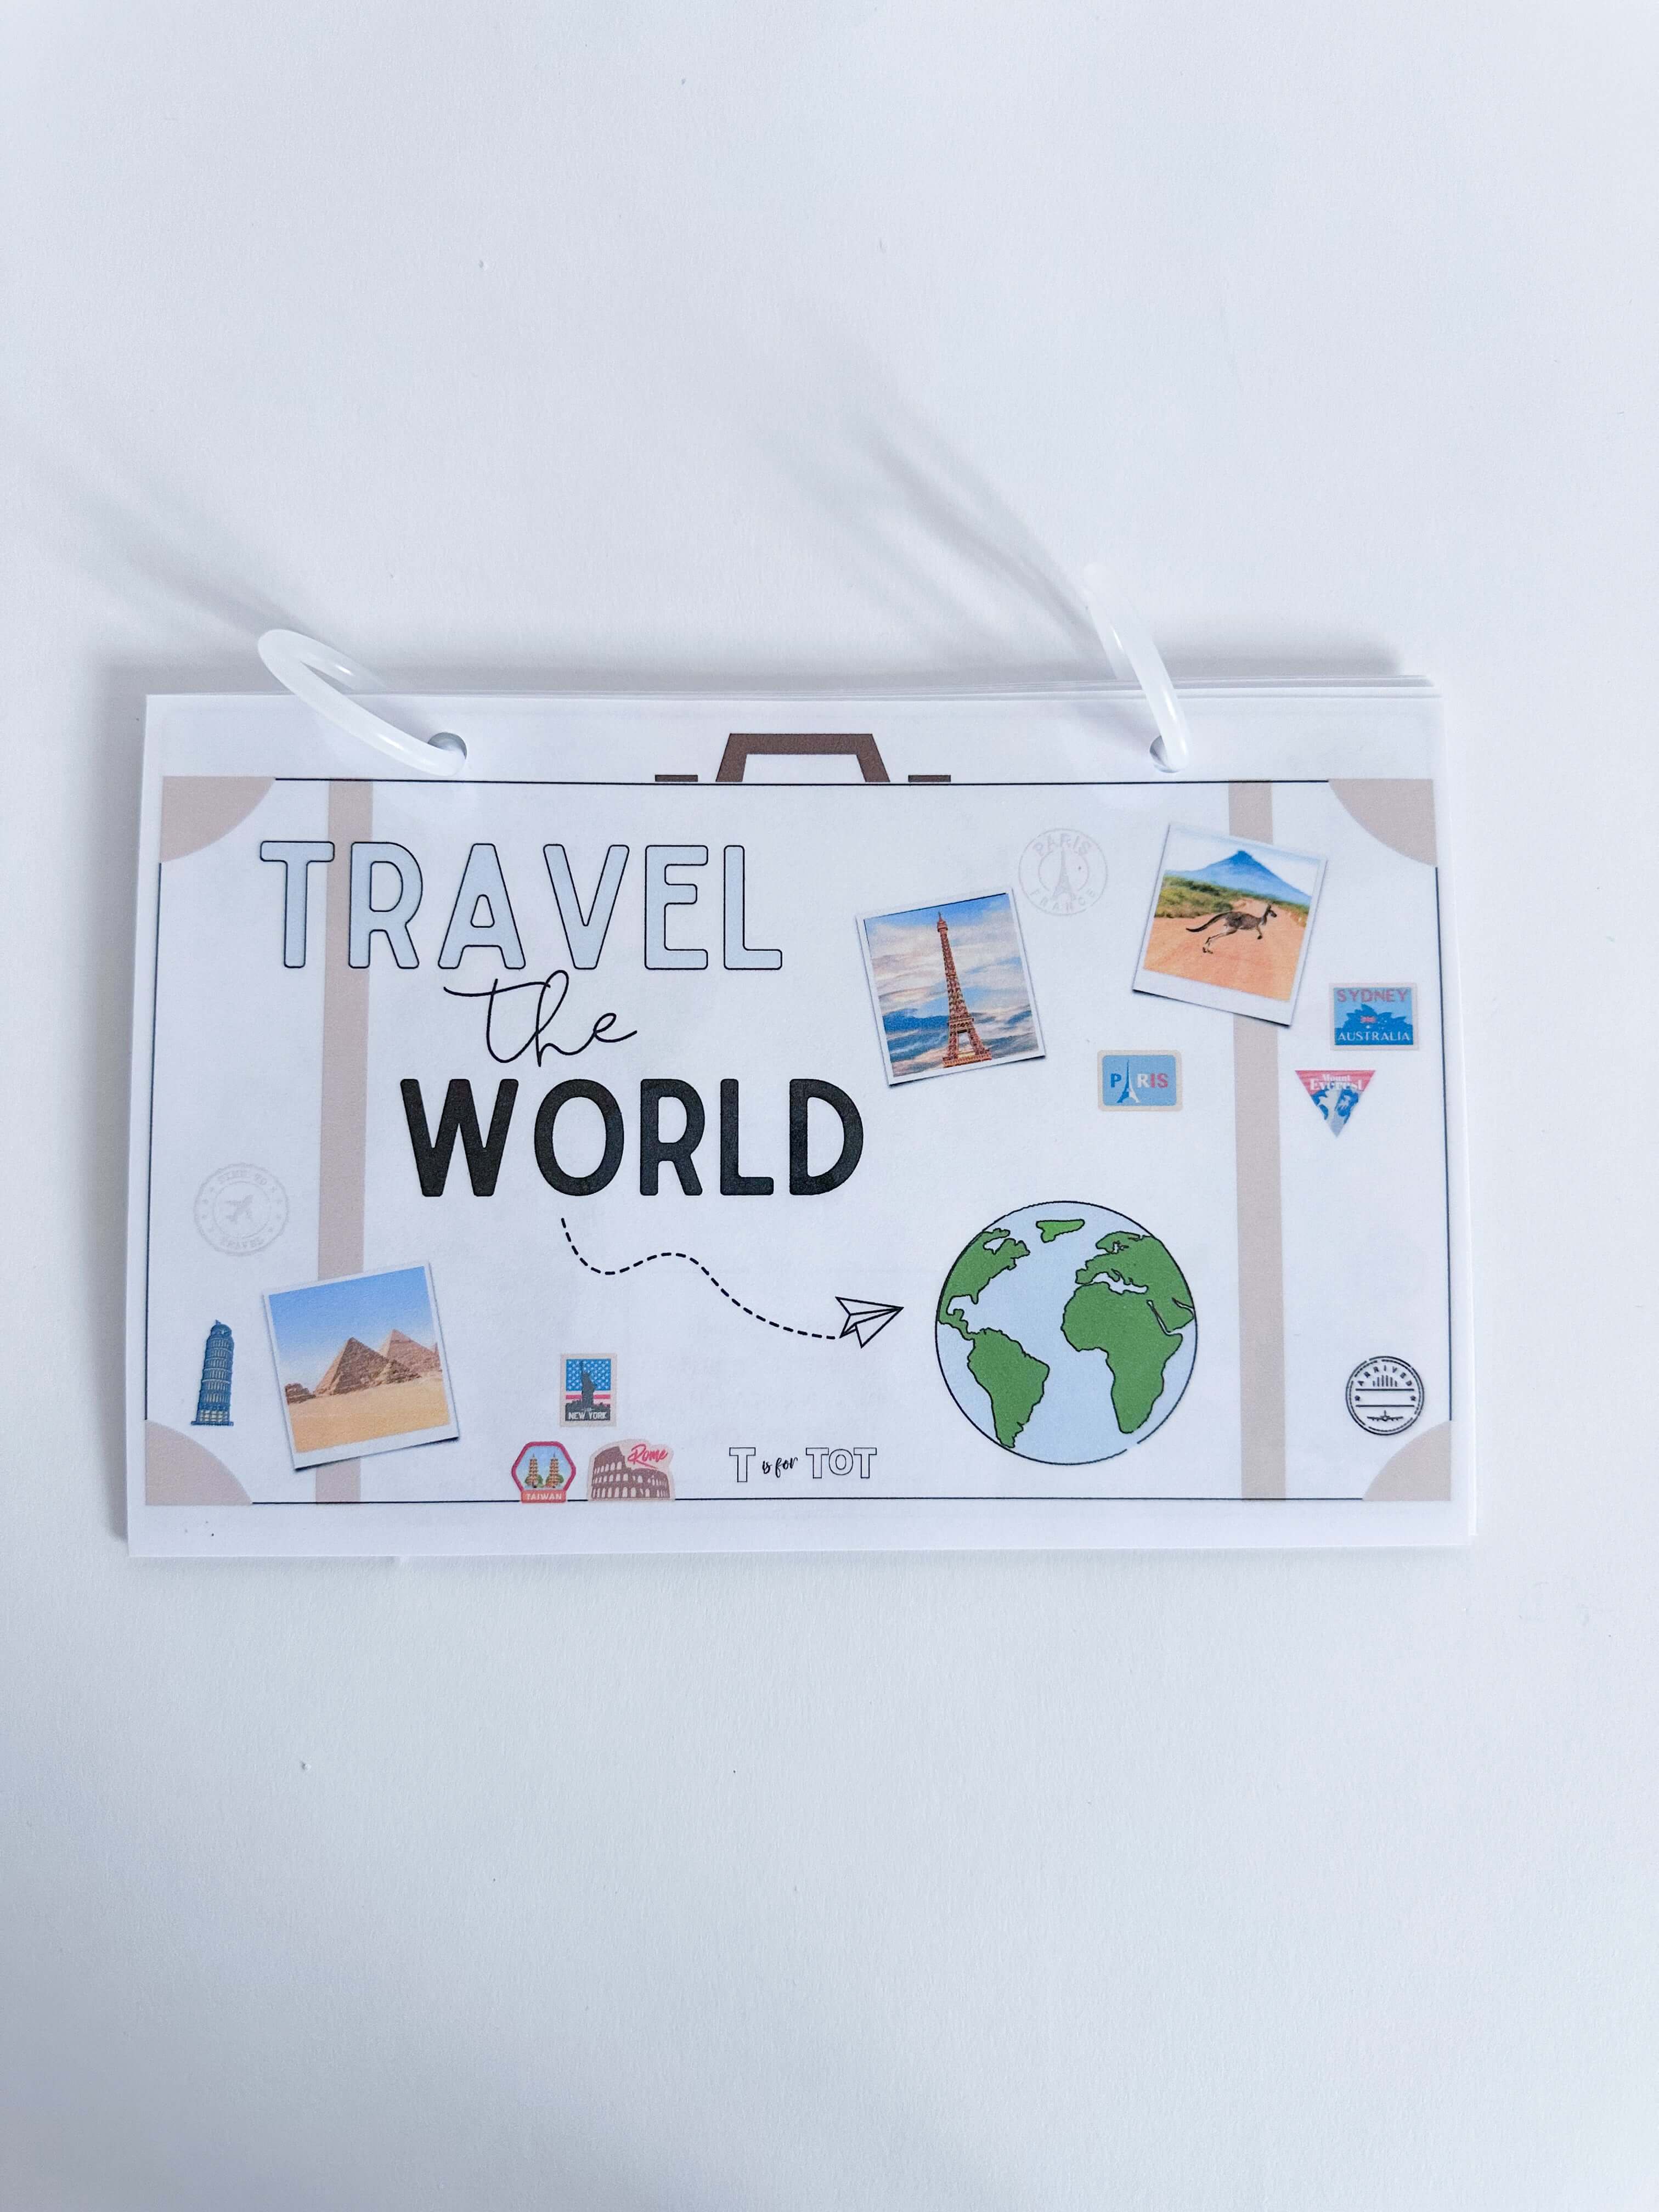 Explore the world with this interactive kit for kids. Contains a board book, Earth playdough cutter, custom map, crafts and activities for each continent, including a boomerang for Australia, stained glass Eiffel Tower for Europe, and maracas for South America.